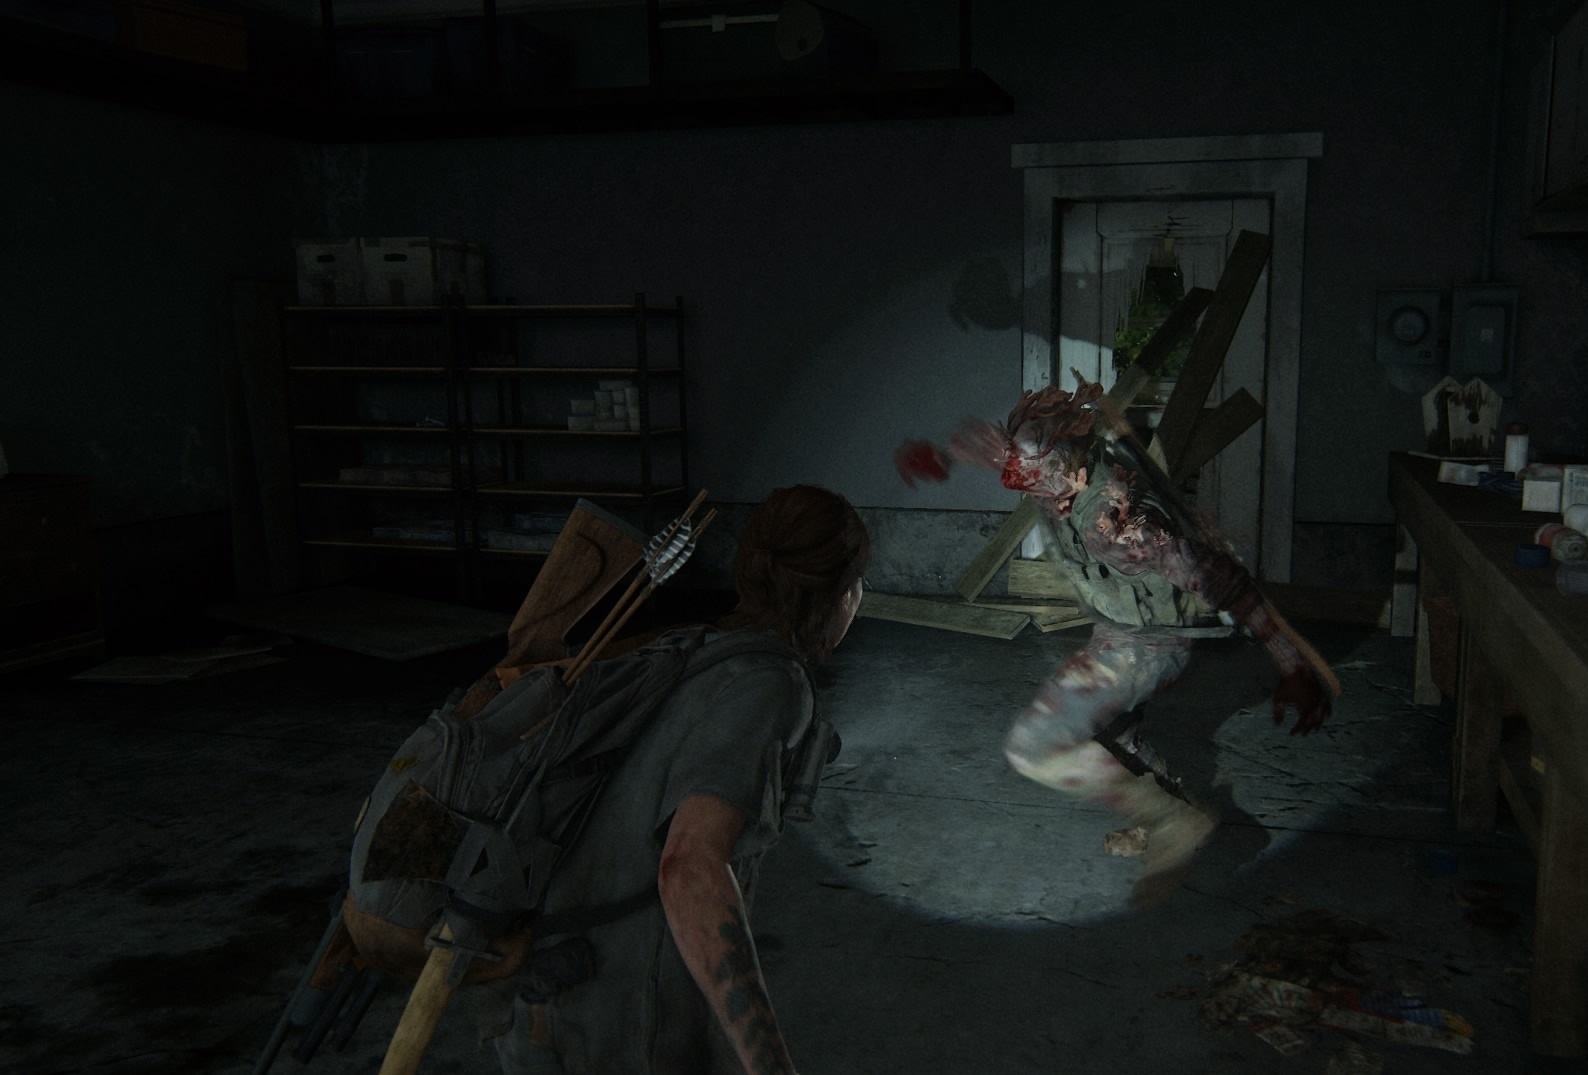 The Last of Us Season 1 Episode 2 Review: Infected